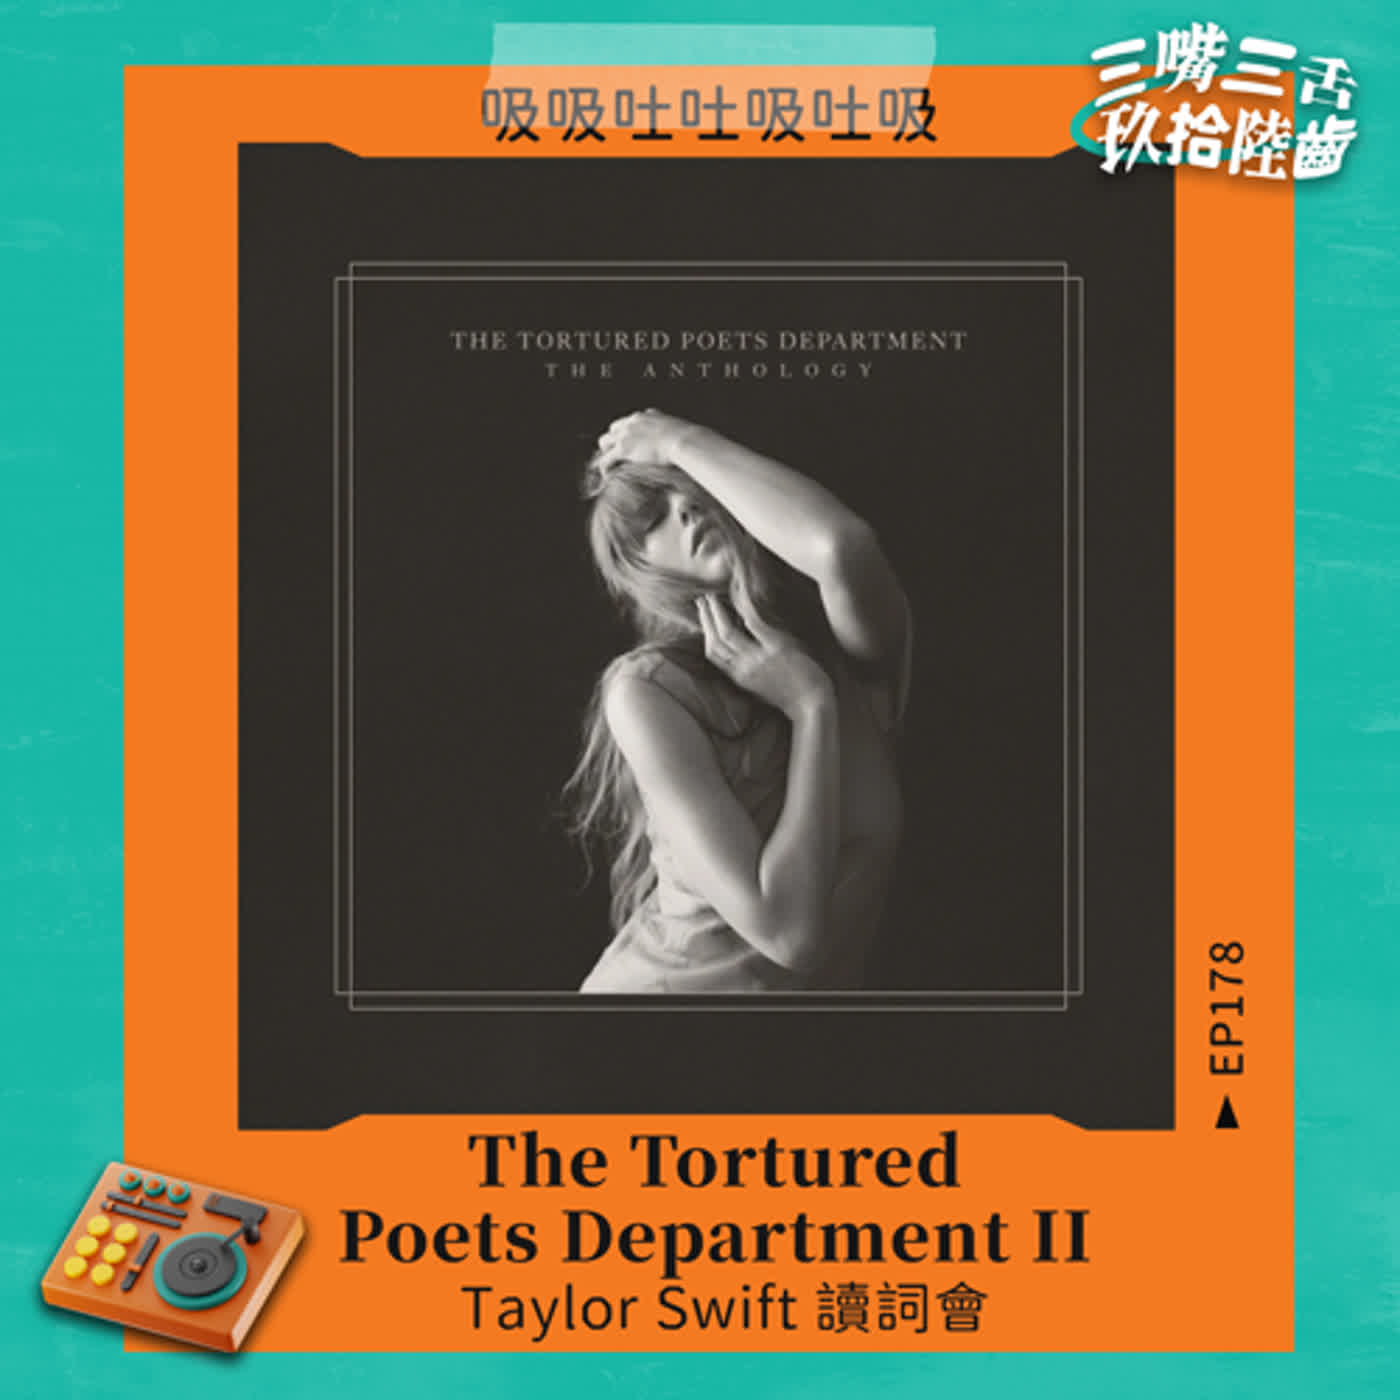 《The Tortured Poets Department》ll：Taylor Swift 讀詞會｜三嘴呼吸月 EP178